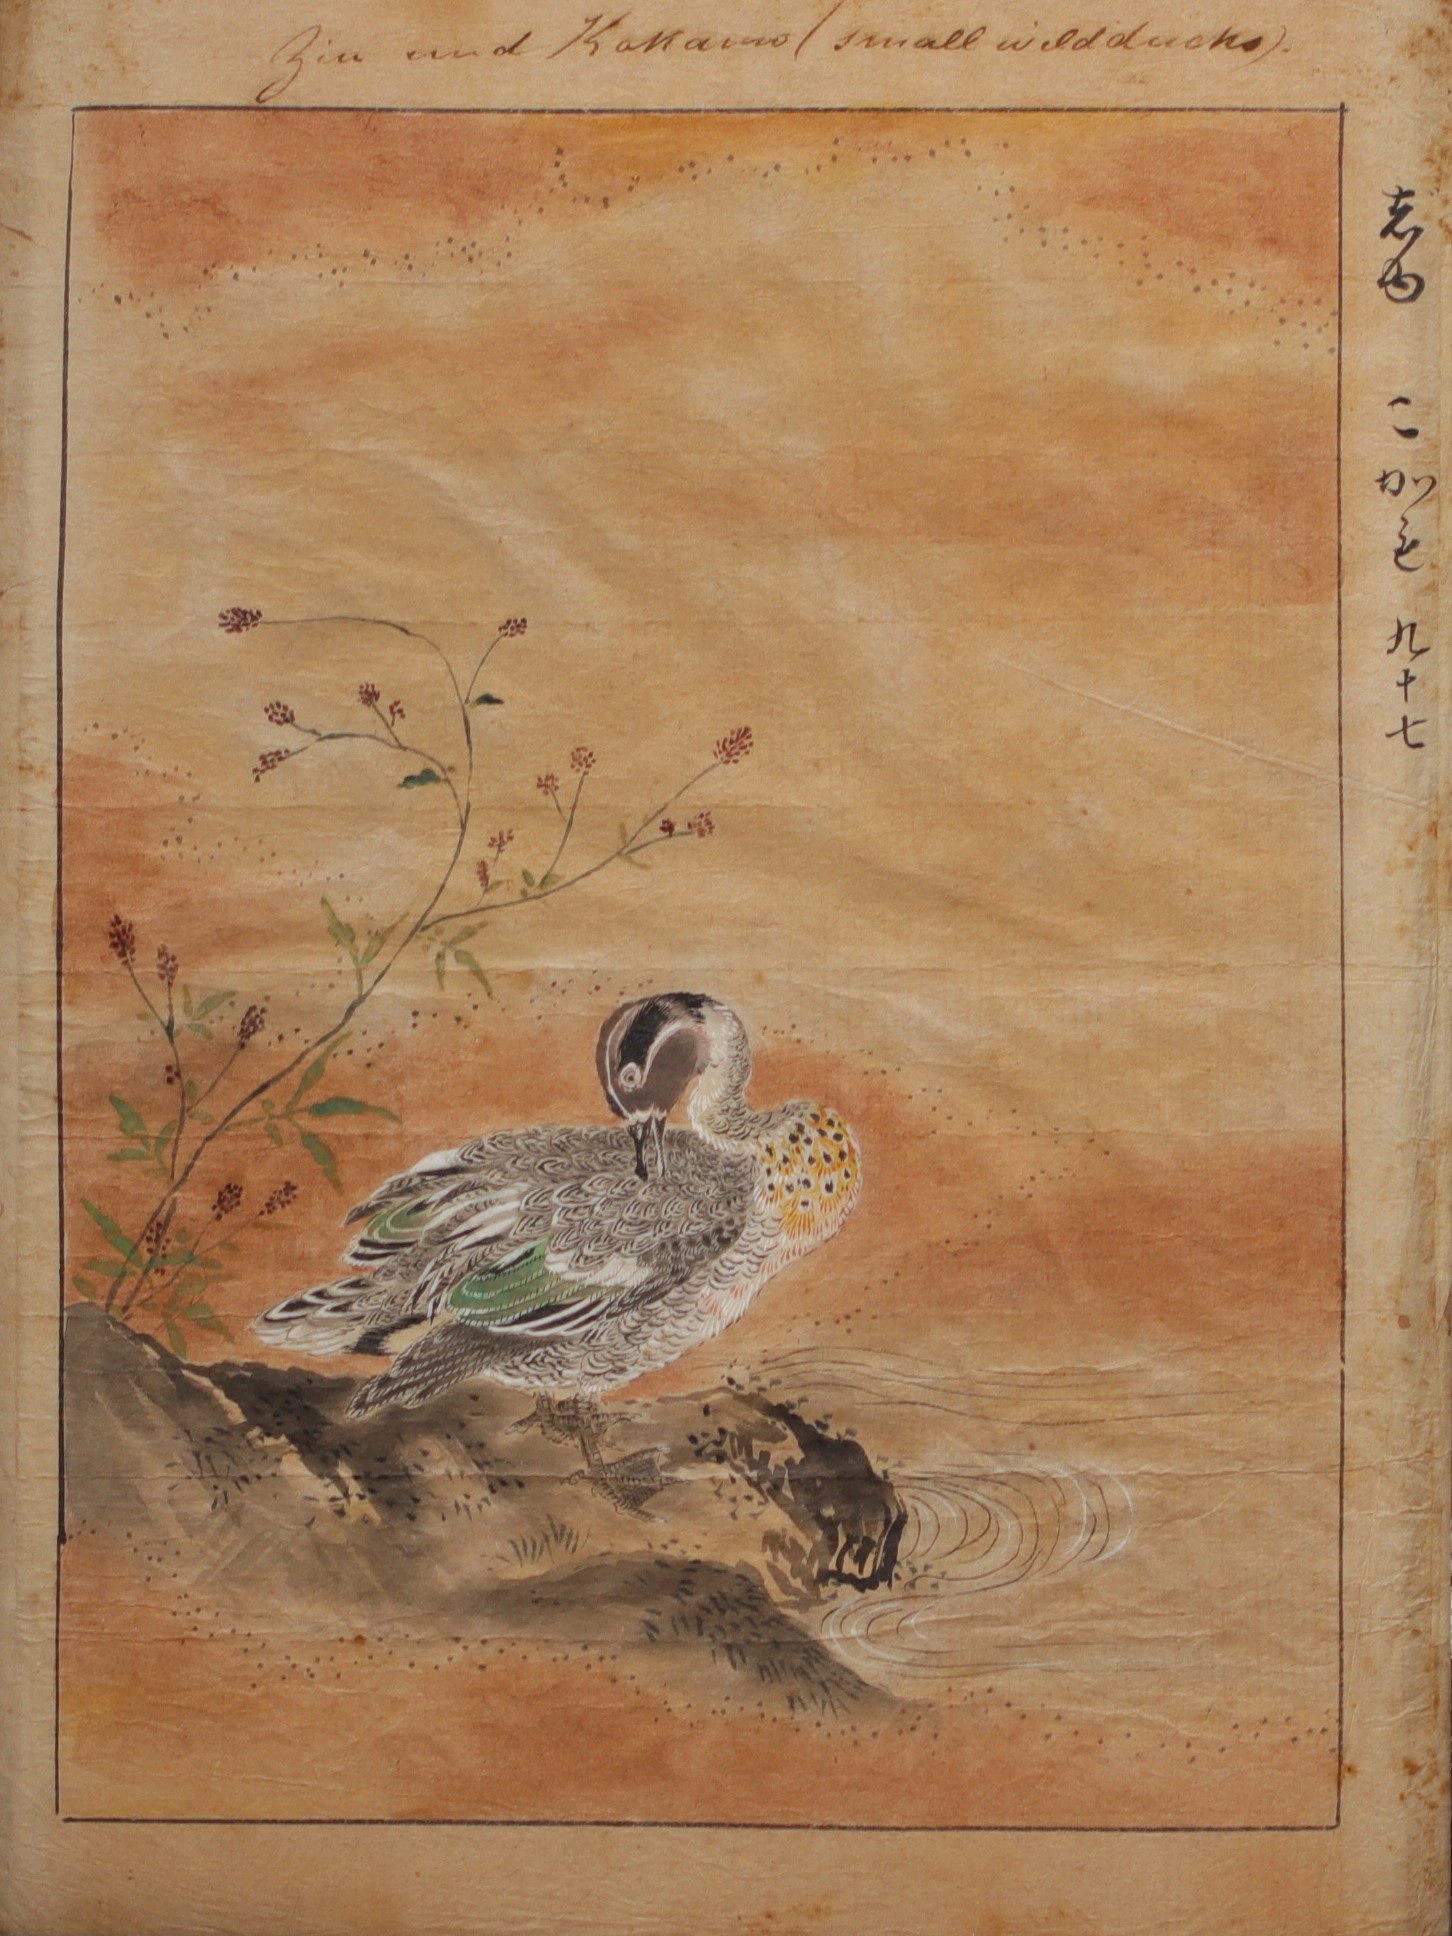 Japan - Print with wild duck and calligraphy, 19th century.